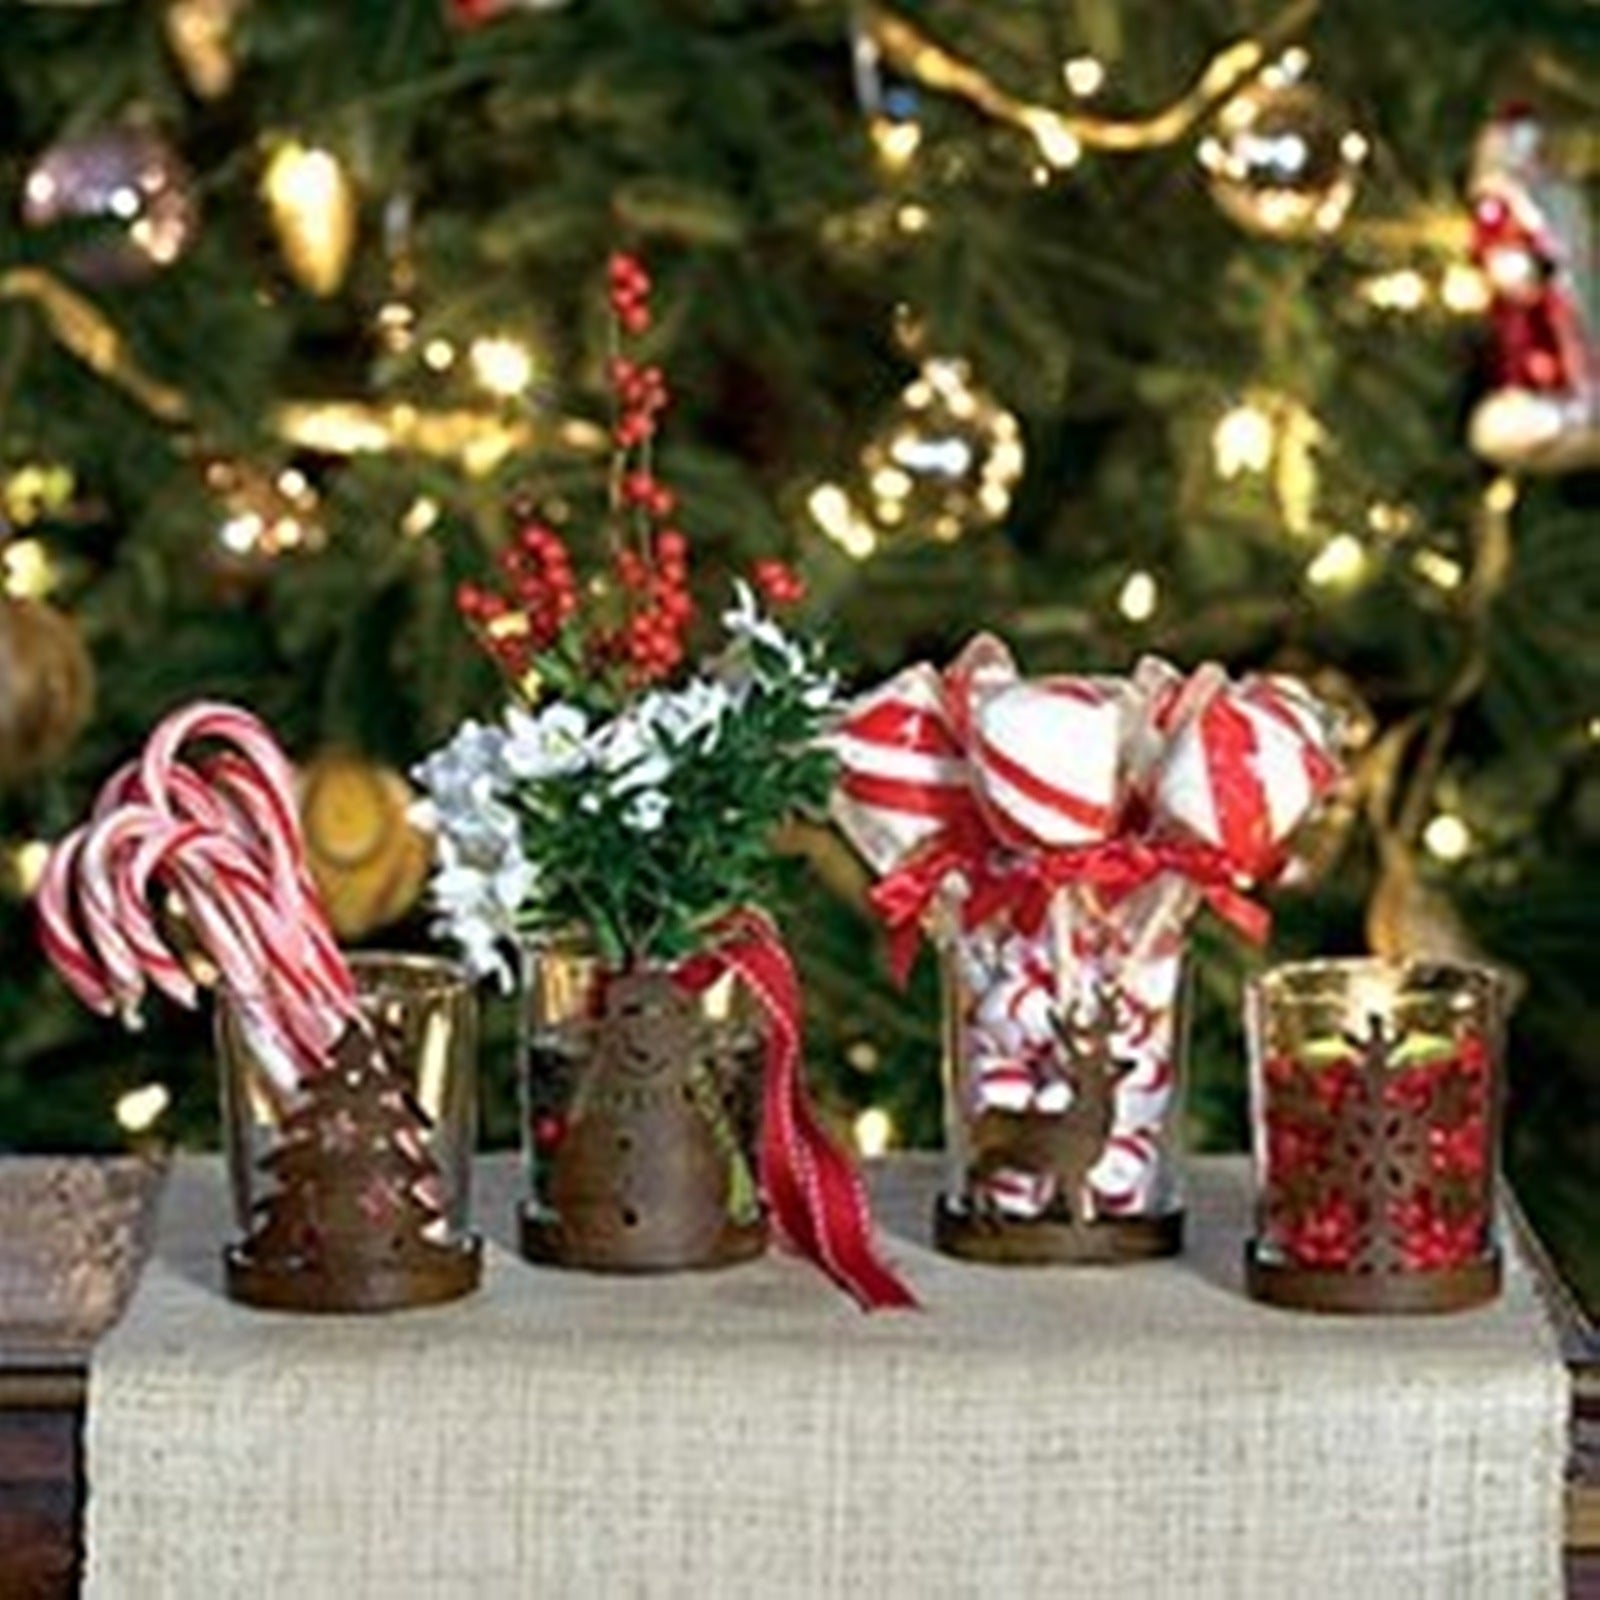 Southern Living AT Home WILLOW HOUSE 4 YULETIDE VOTIVE CANDLE HOLDERS BONZE / GLASS NIB